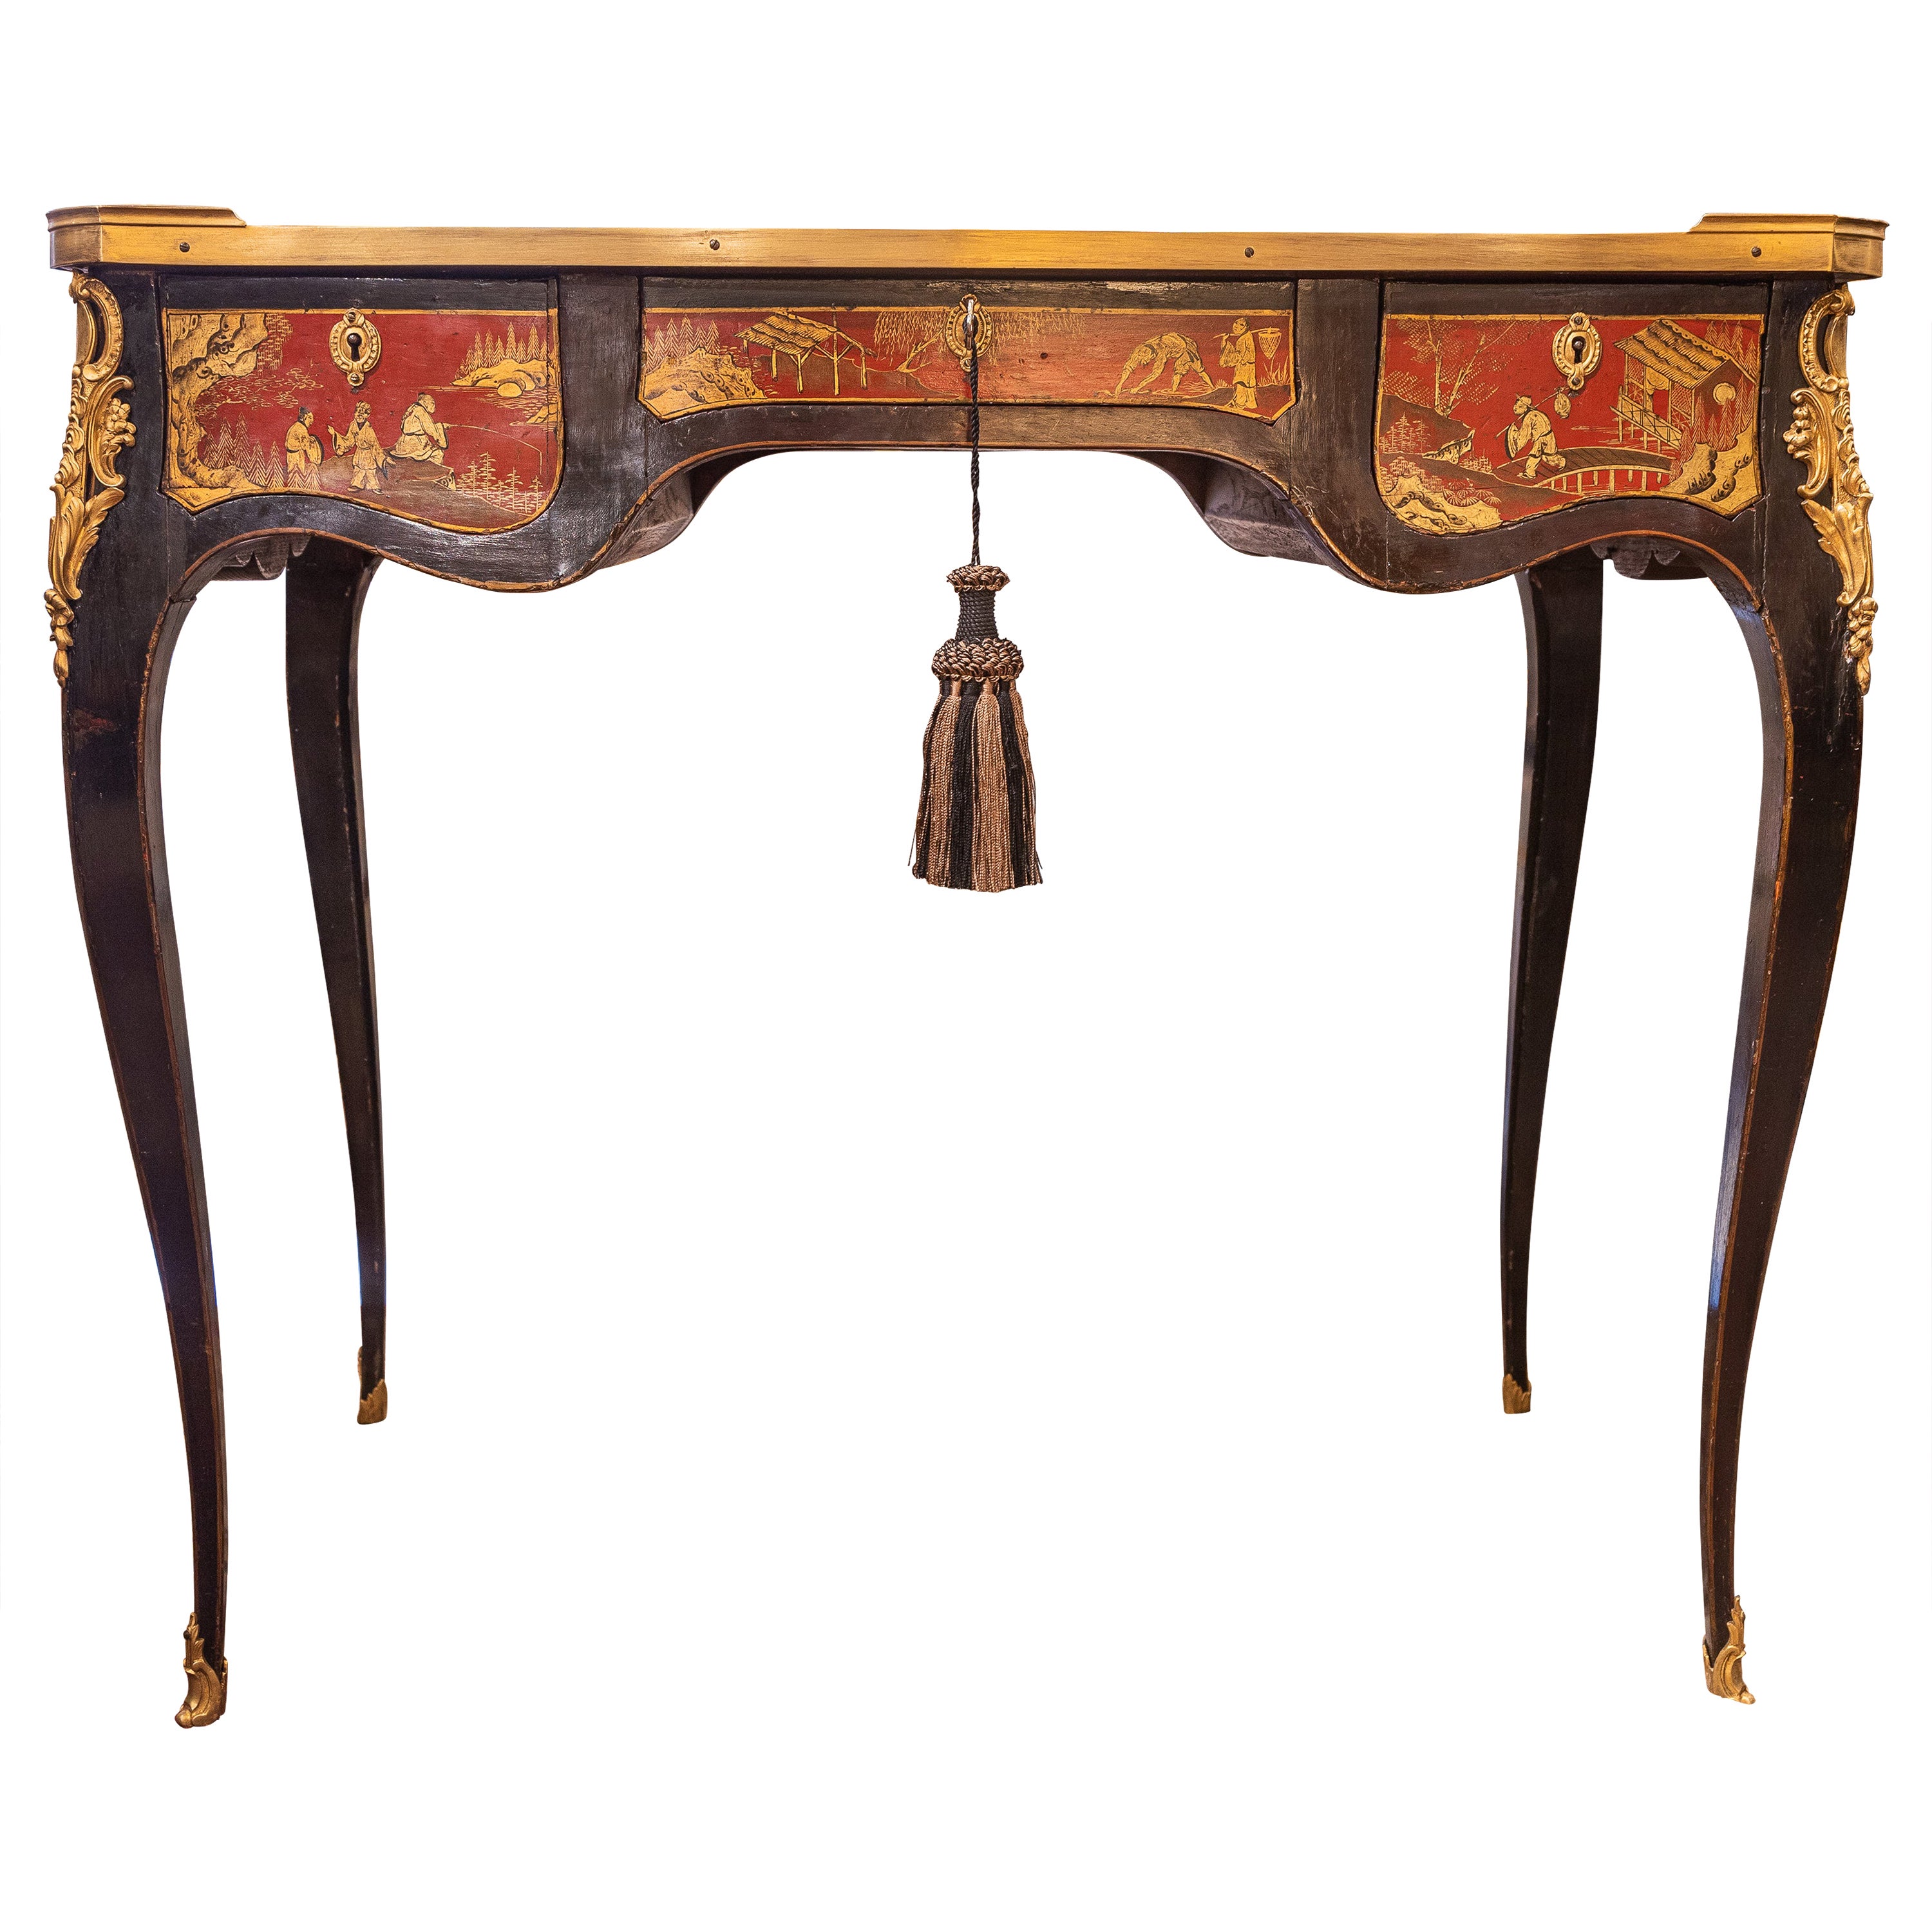 A fine 19th c French red lacquered Chinoiserie inspired writing desk For Sale